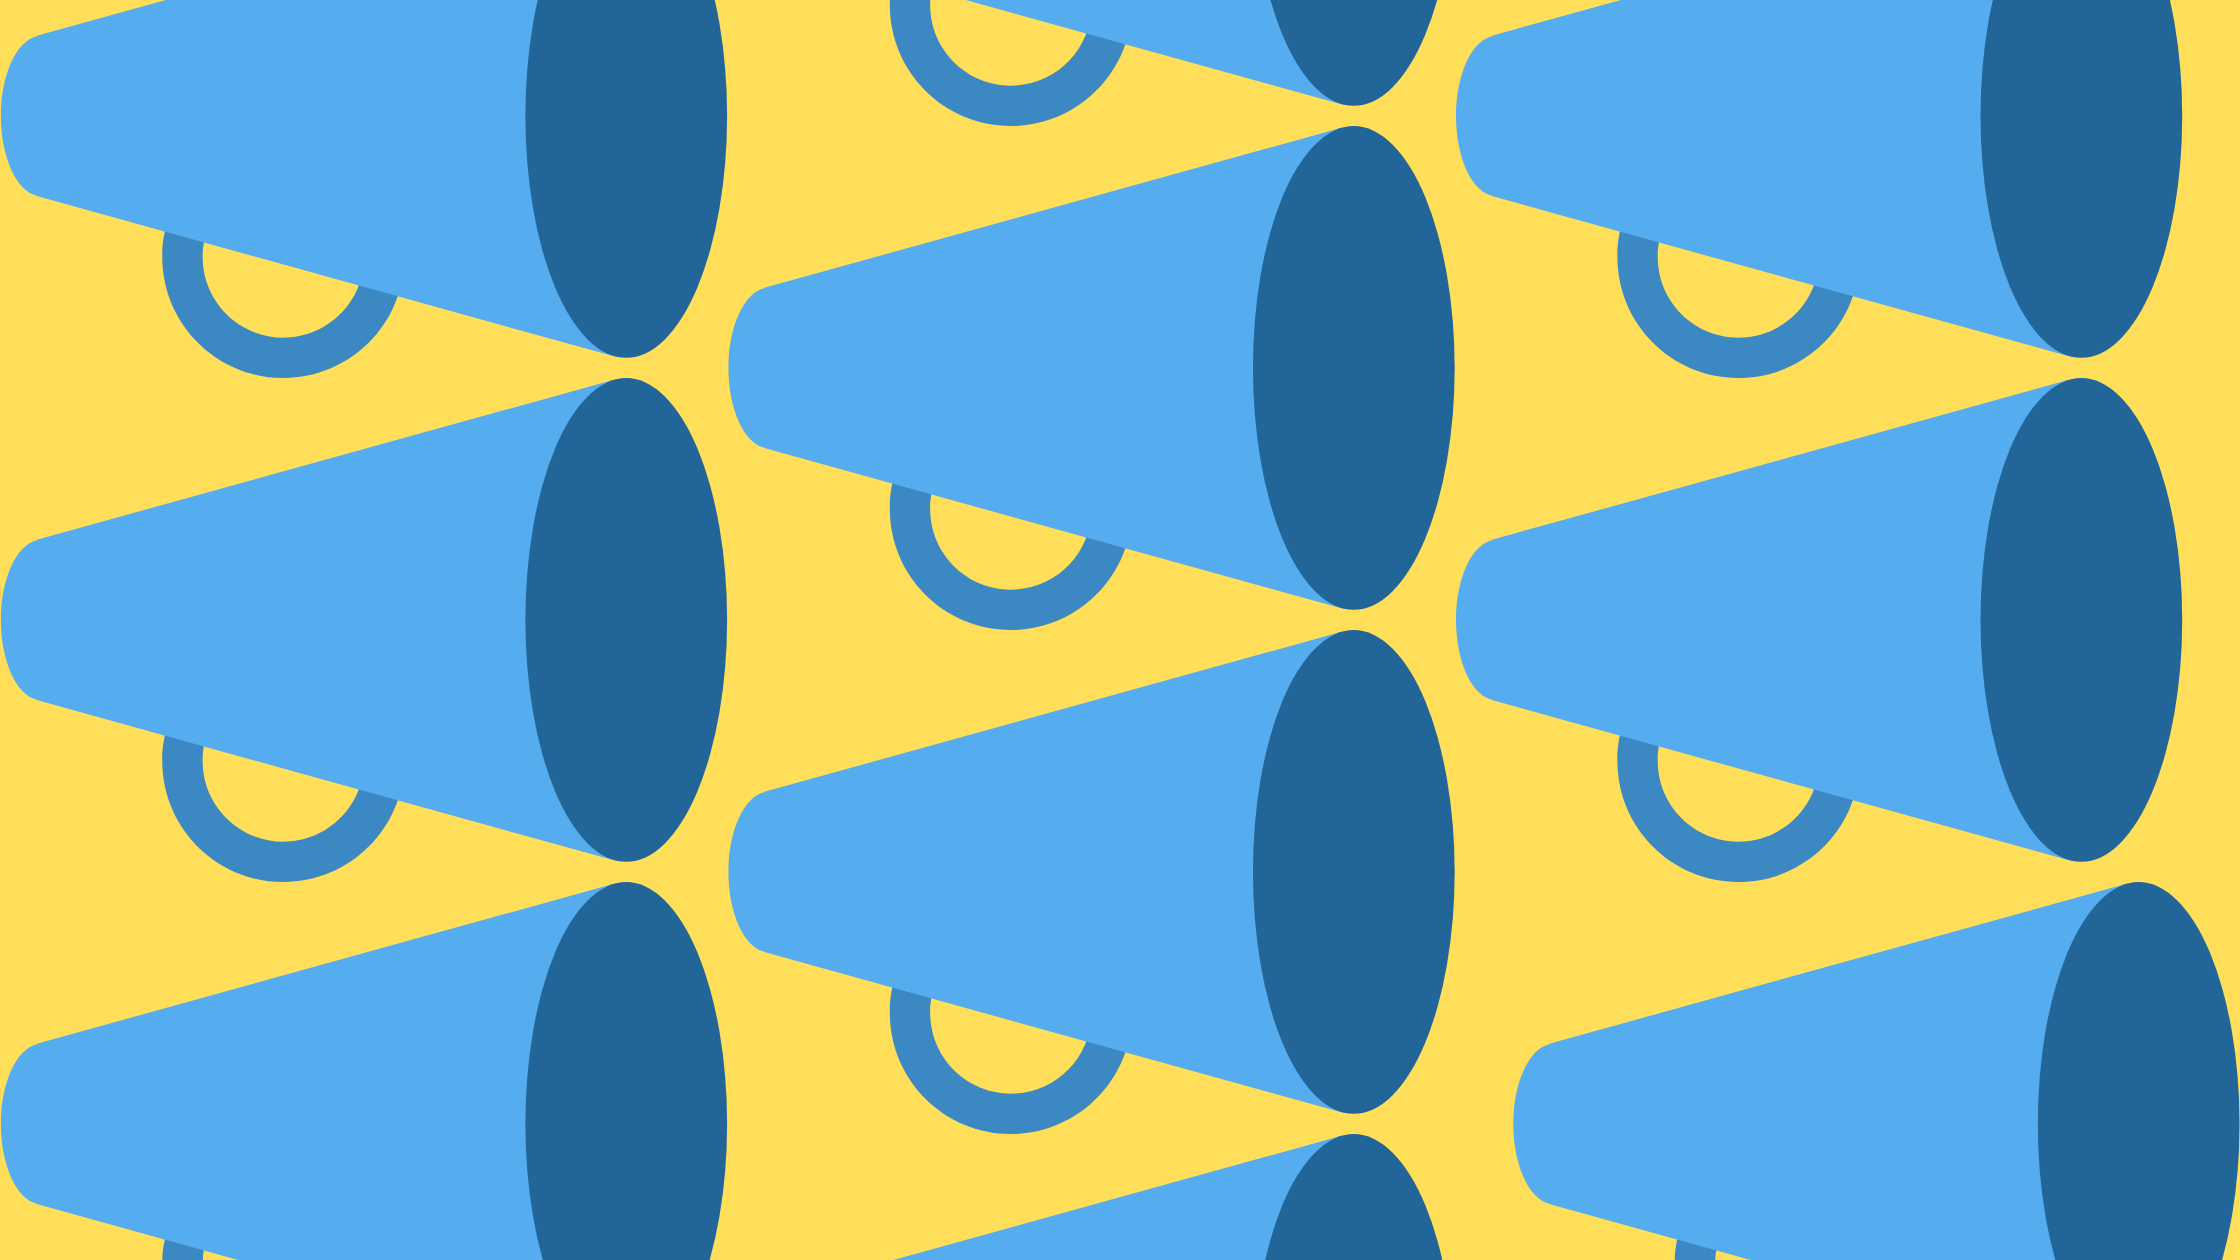 Blue Megaphones on a yellow background